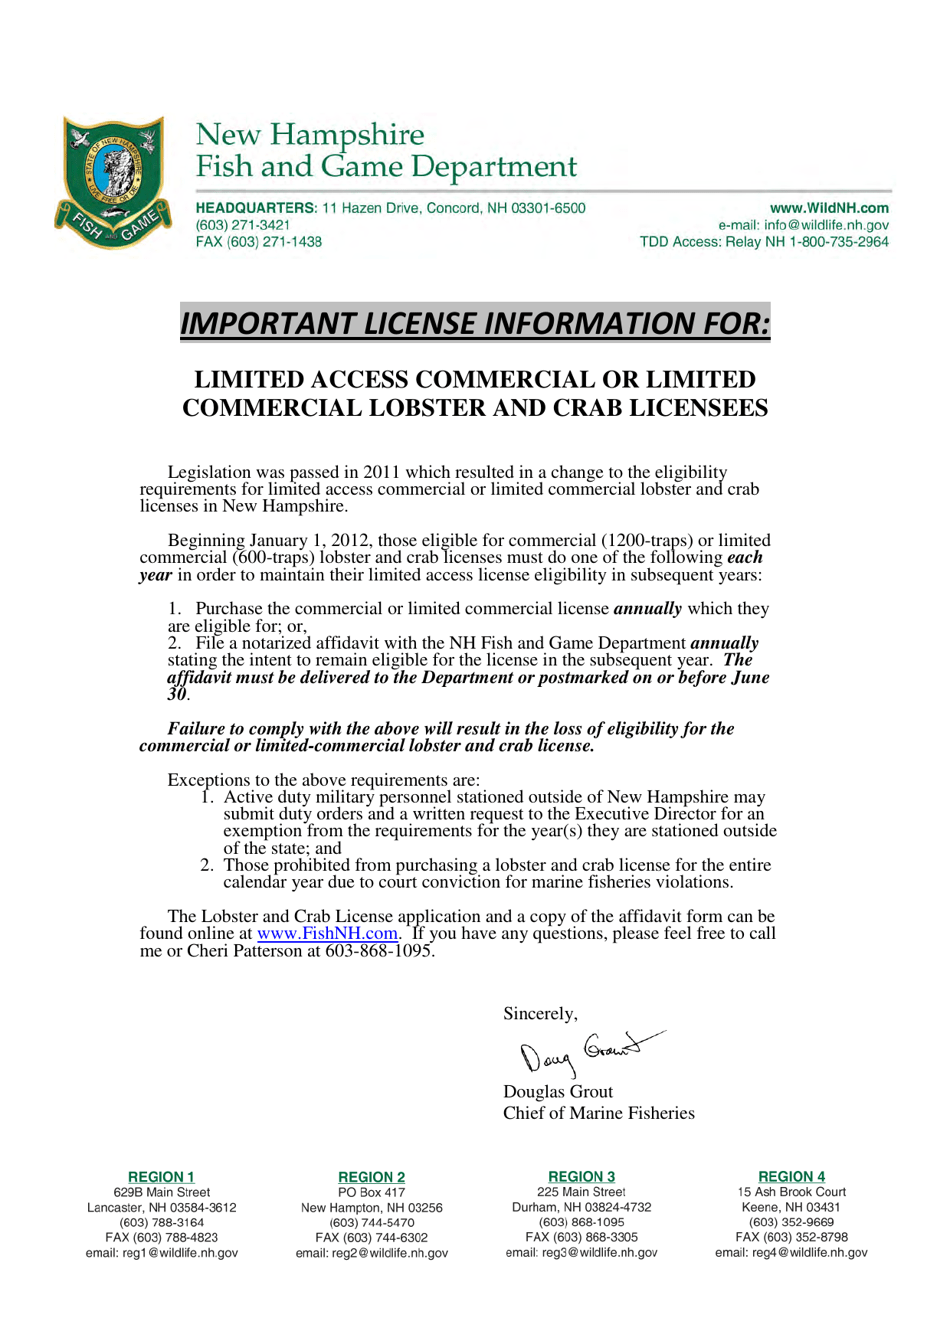 Affidavit for Limited Access Lobster and Crab Licenses - New Hampshire, Page 1